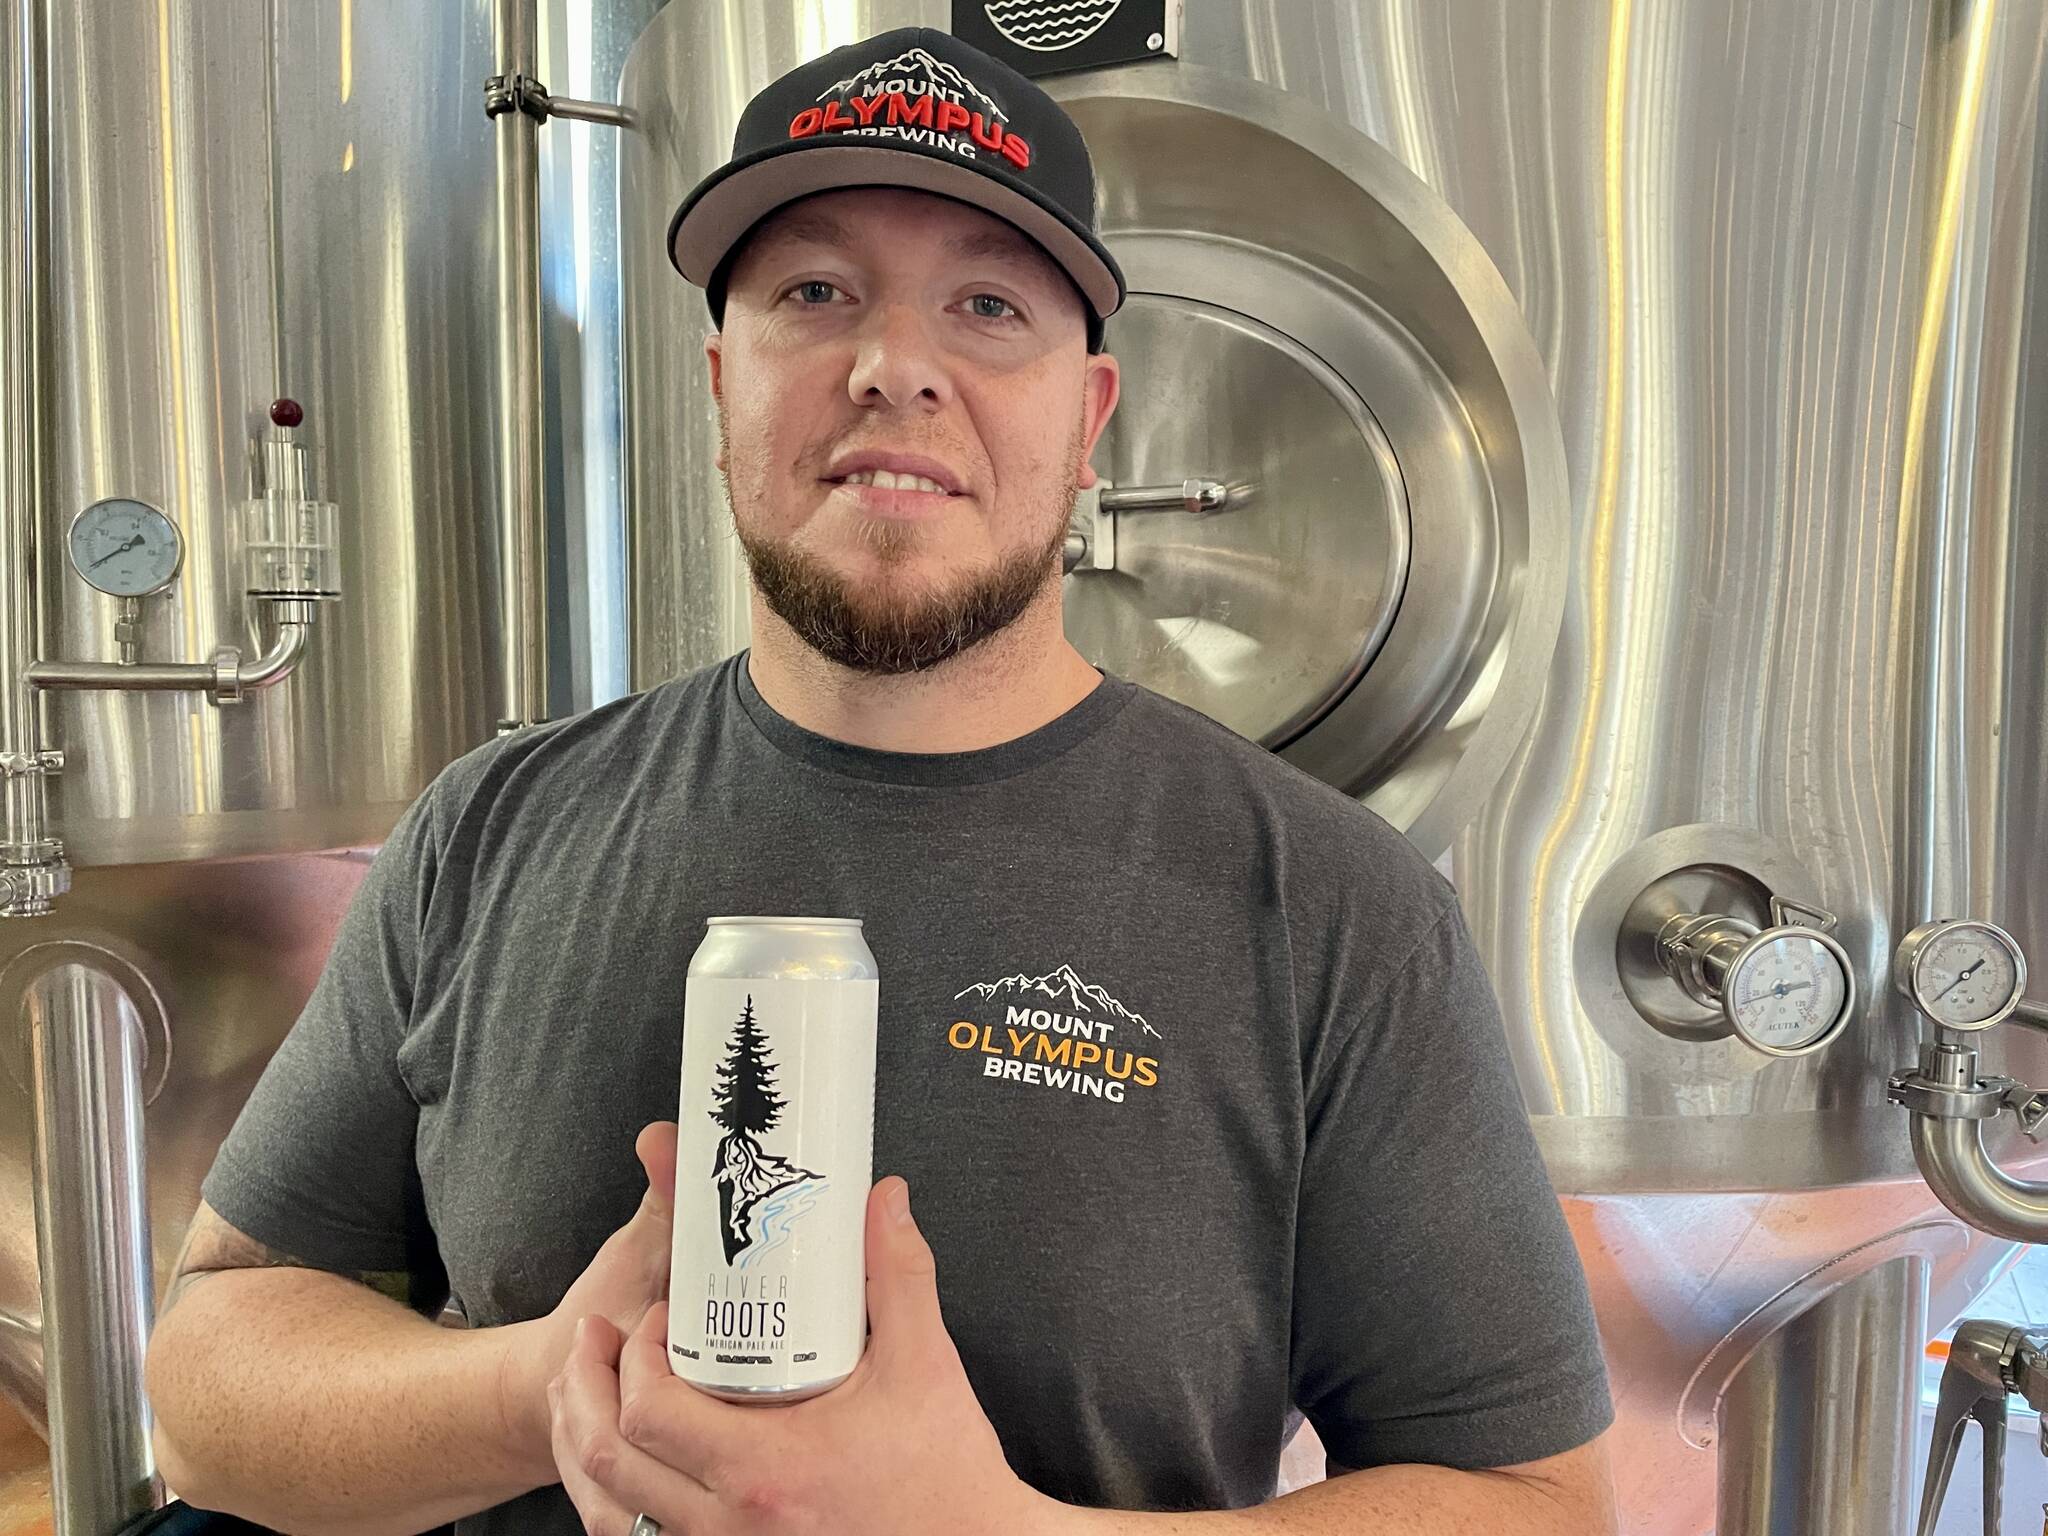 Michael S. Lockett / The Daily World
Head brewer and owner of Mount Olympus Brewery Orlando Maldonado poses with the beer they partnered with the Grays Harbor Conservation District on.